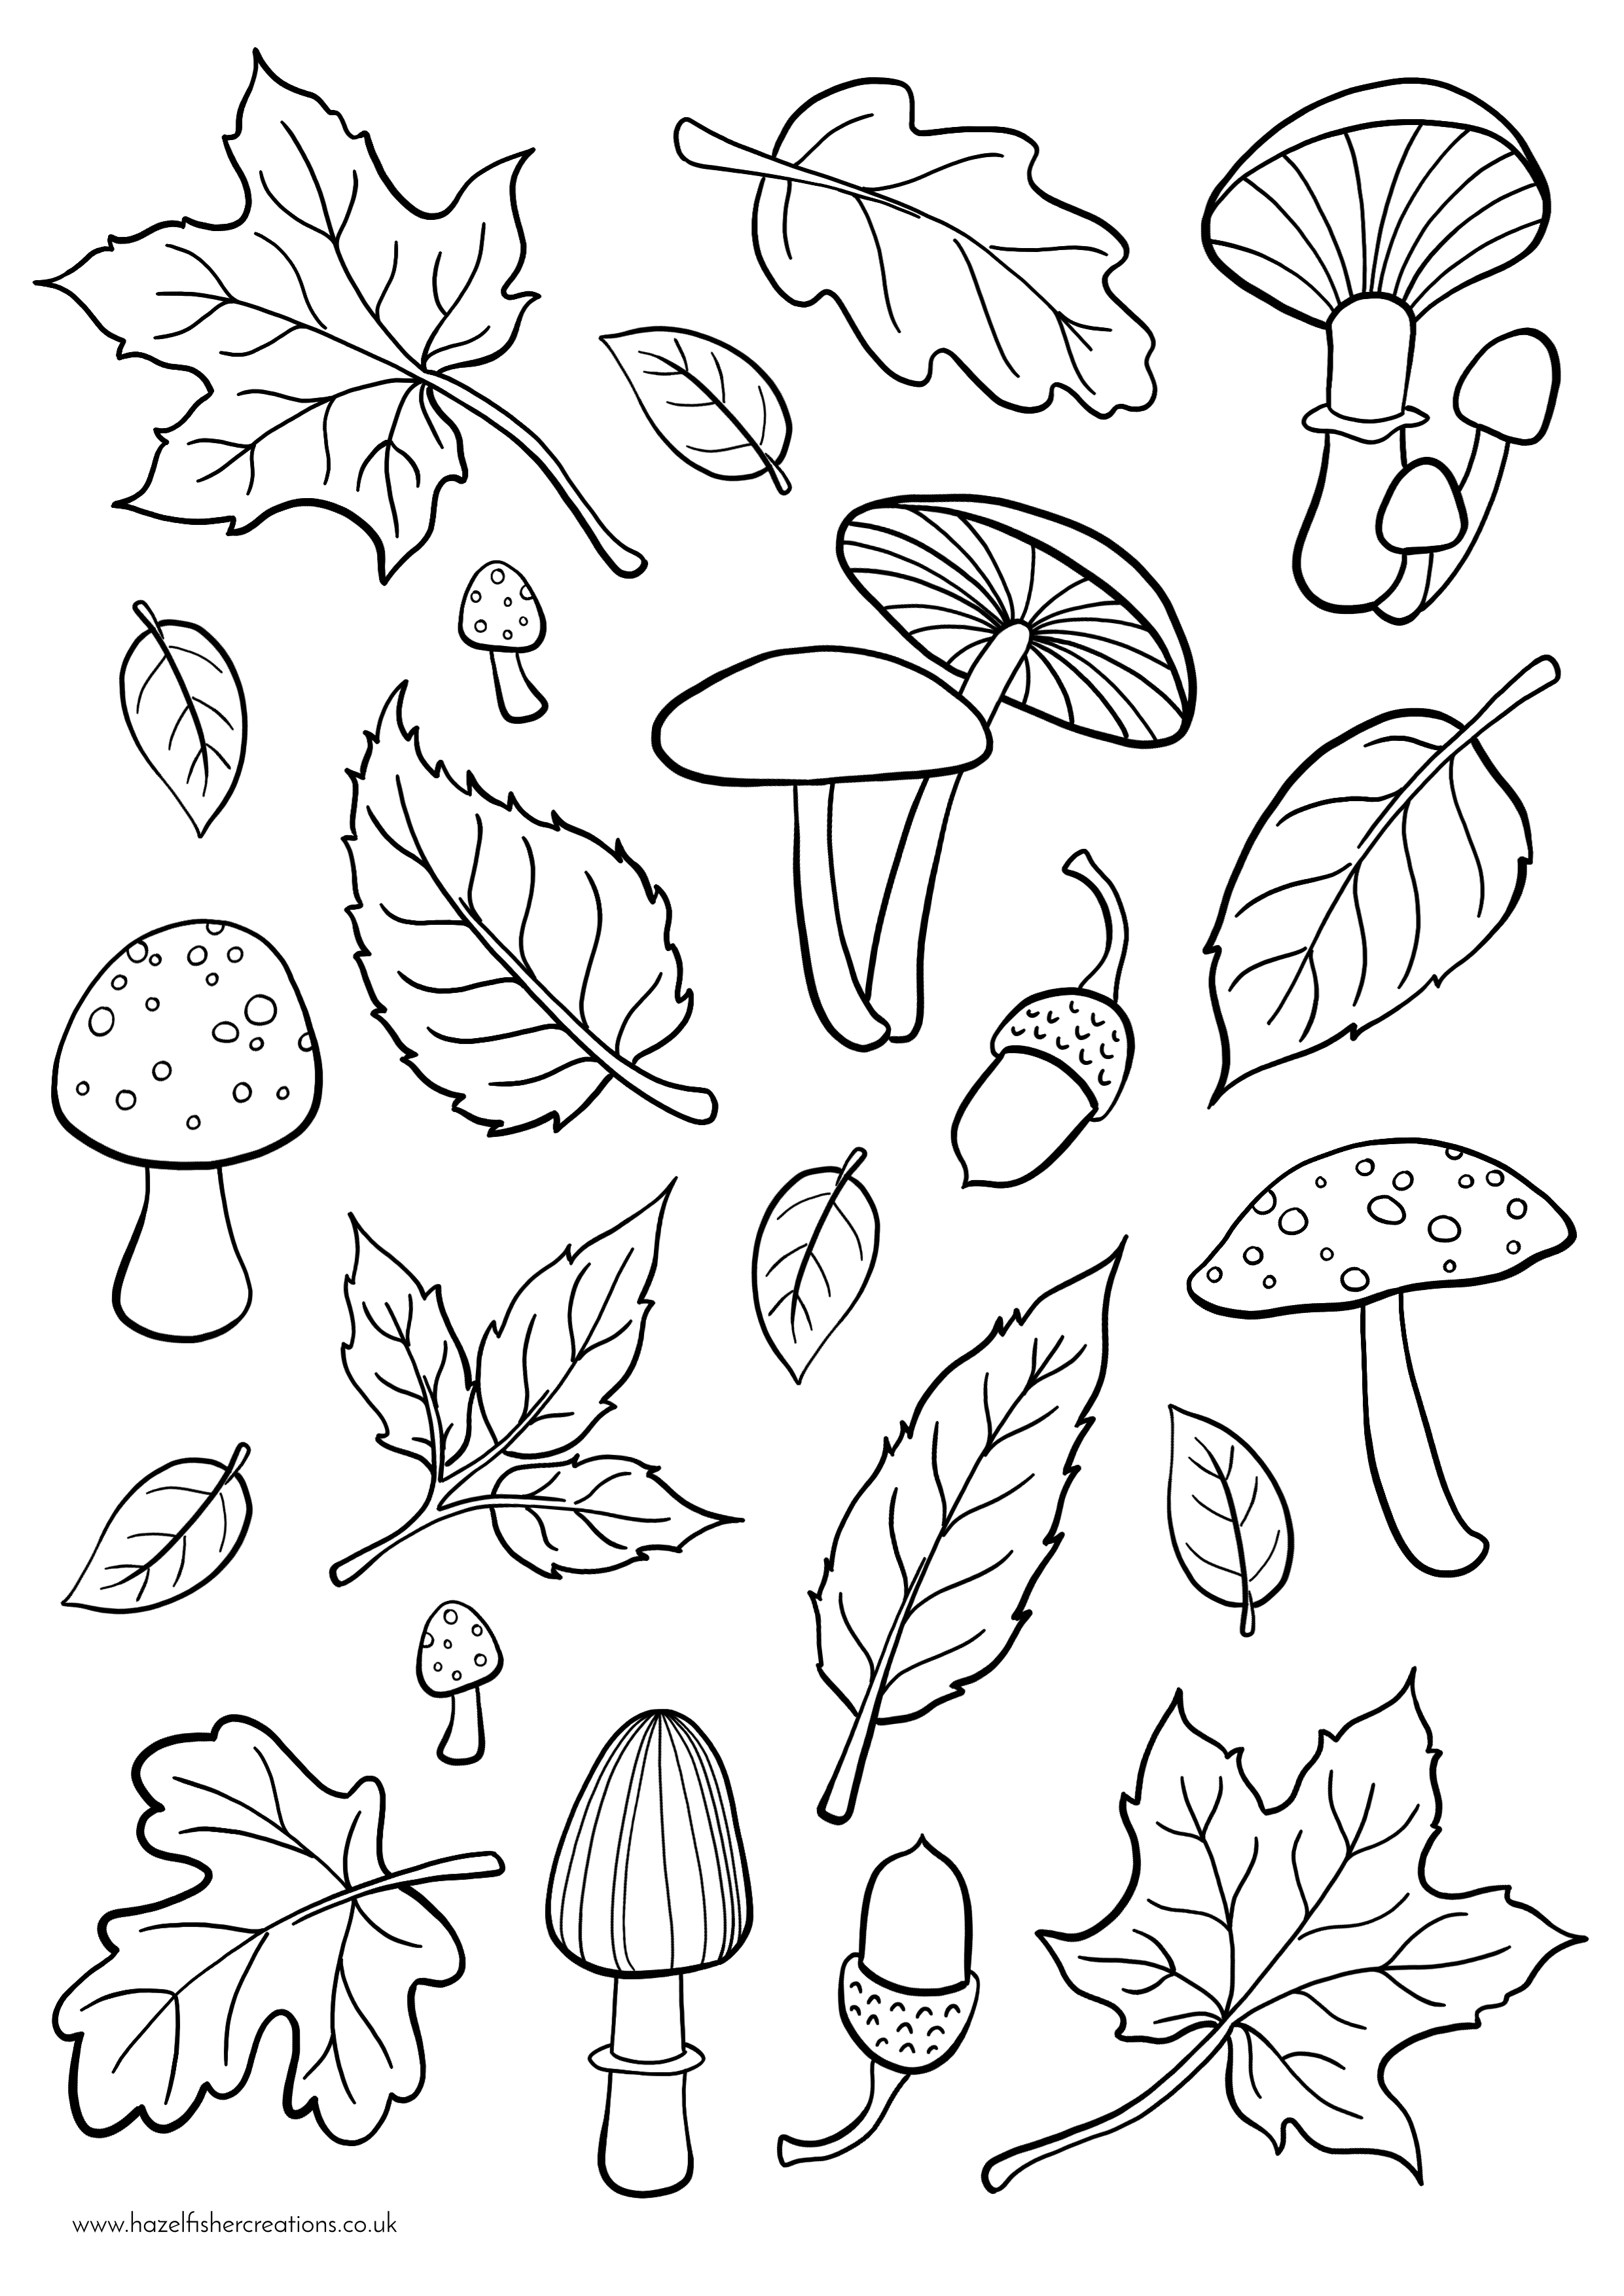 printable-autumn-and-fall-coloring-pages-101-activity